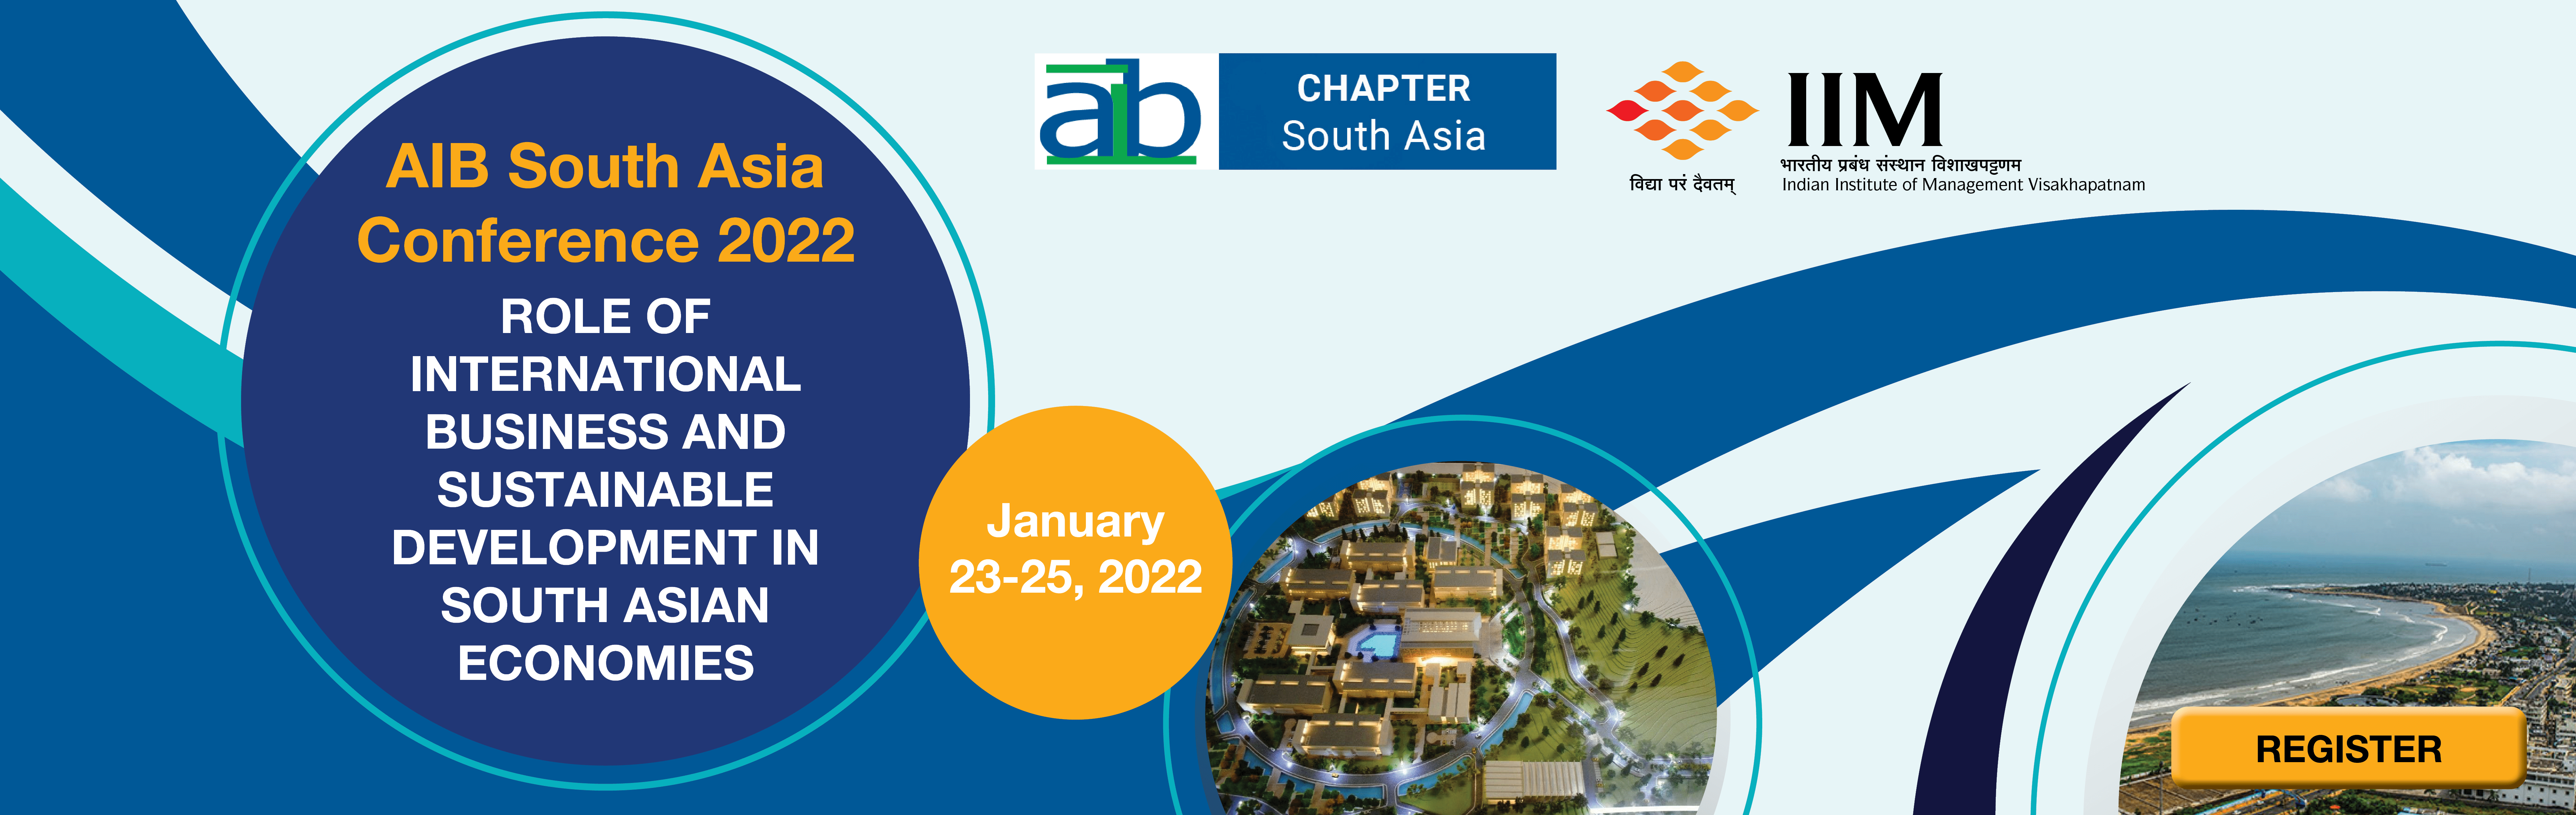 AIB South Asia Conference 2022 without read more